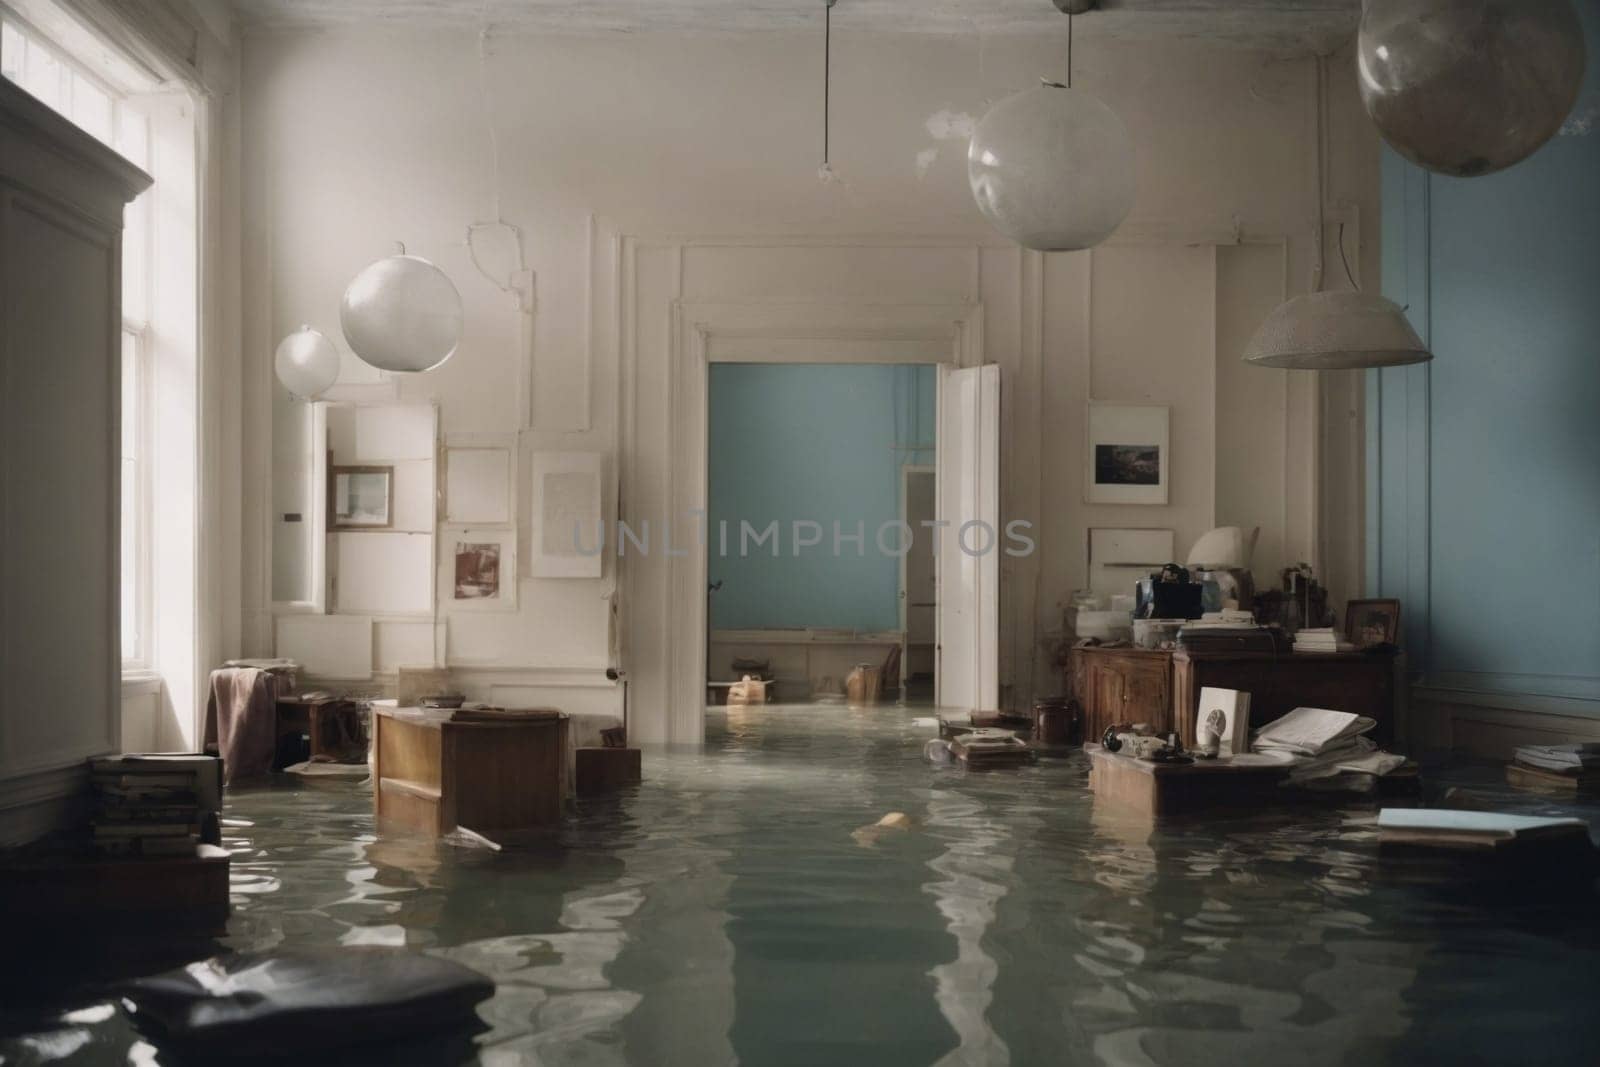 A living room flooded with excessive water, showcasing scattered boxes on the floor.